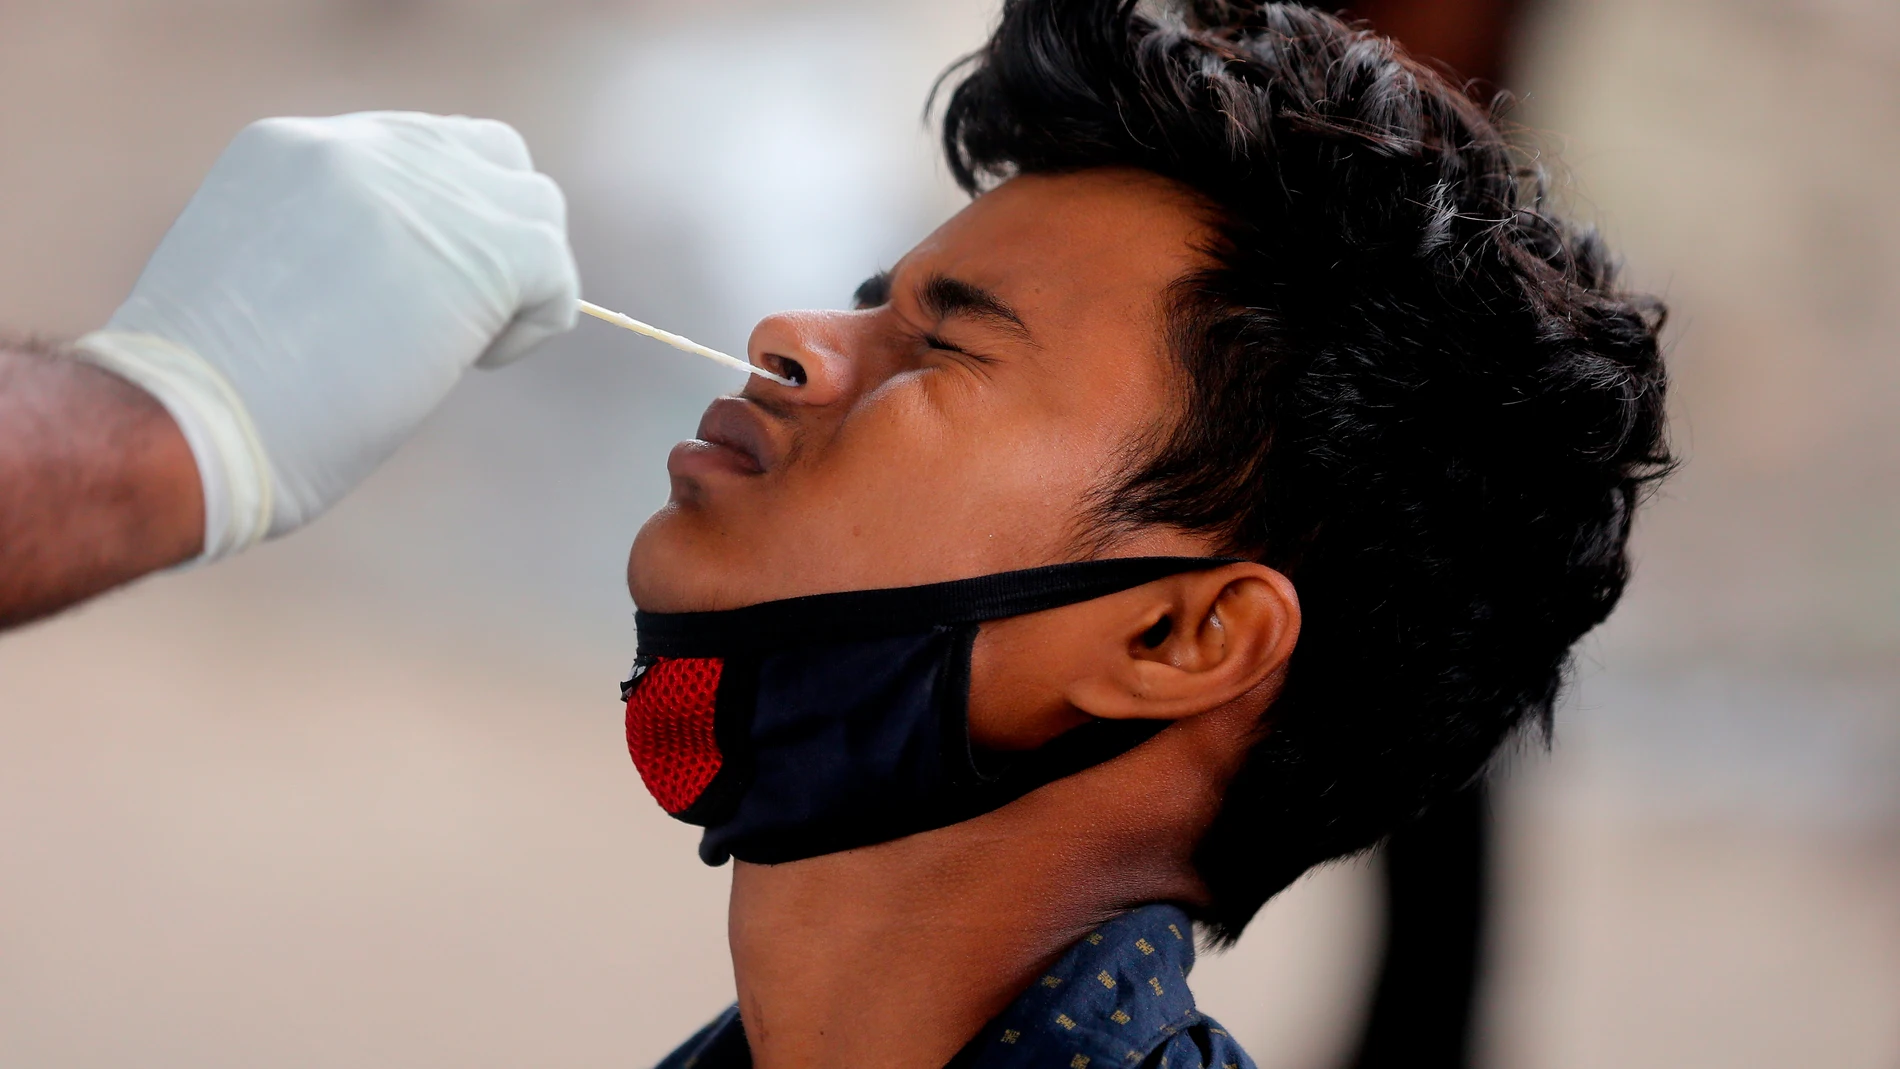 Bangalore (India), 19/07/2021.- A health worker takes a nasal and throat swab sample of a man for a COVID-19 test in Bangalore, India, 19 July 2021. The Karnataka government is further relaxing the coronavirus COVID-19 lockdown restrictions in the wake of lower infection cases and positivity rate falling below the two percent. People are advised to continue wearing protective face masks, maintaining social distancing and avoiding unnecessary travelling. EFE/EPA/JAGADEESH NV